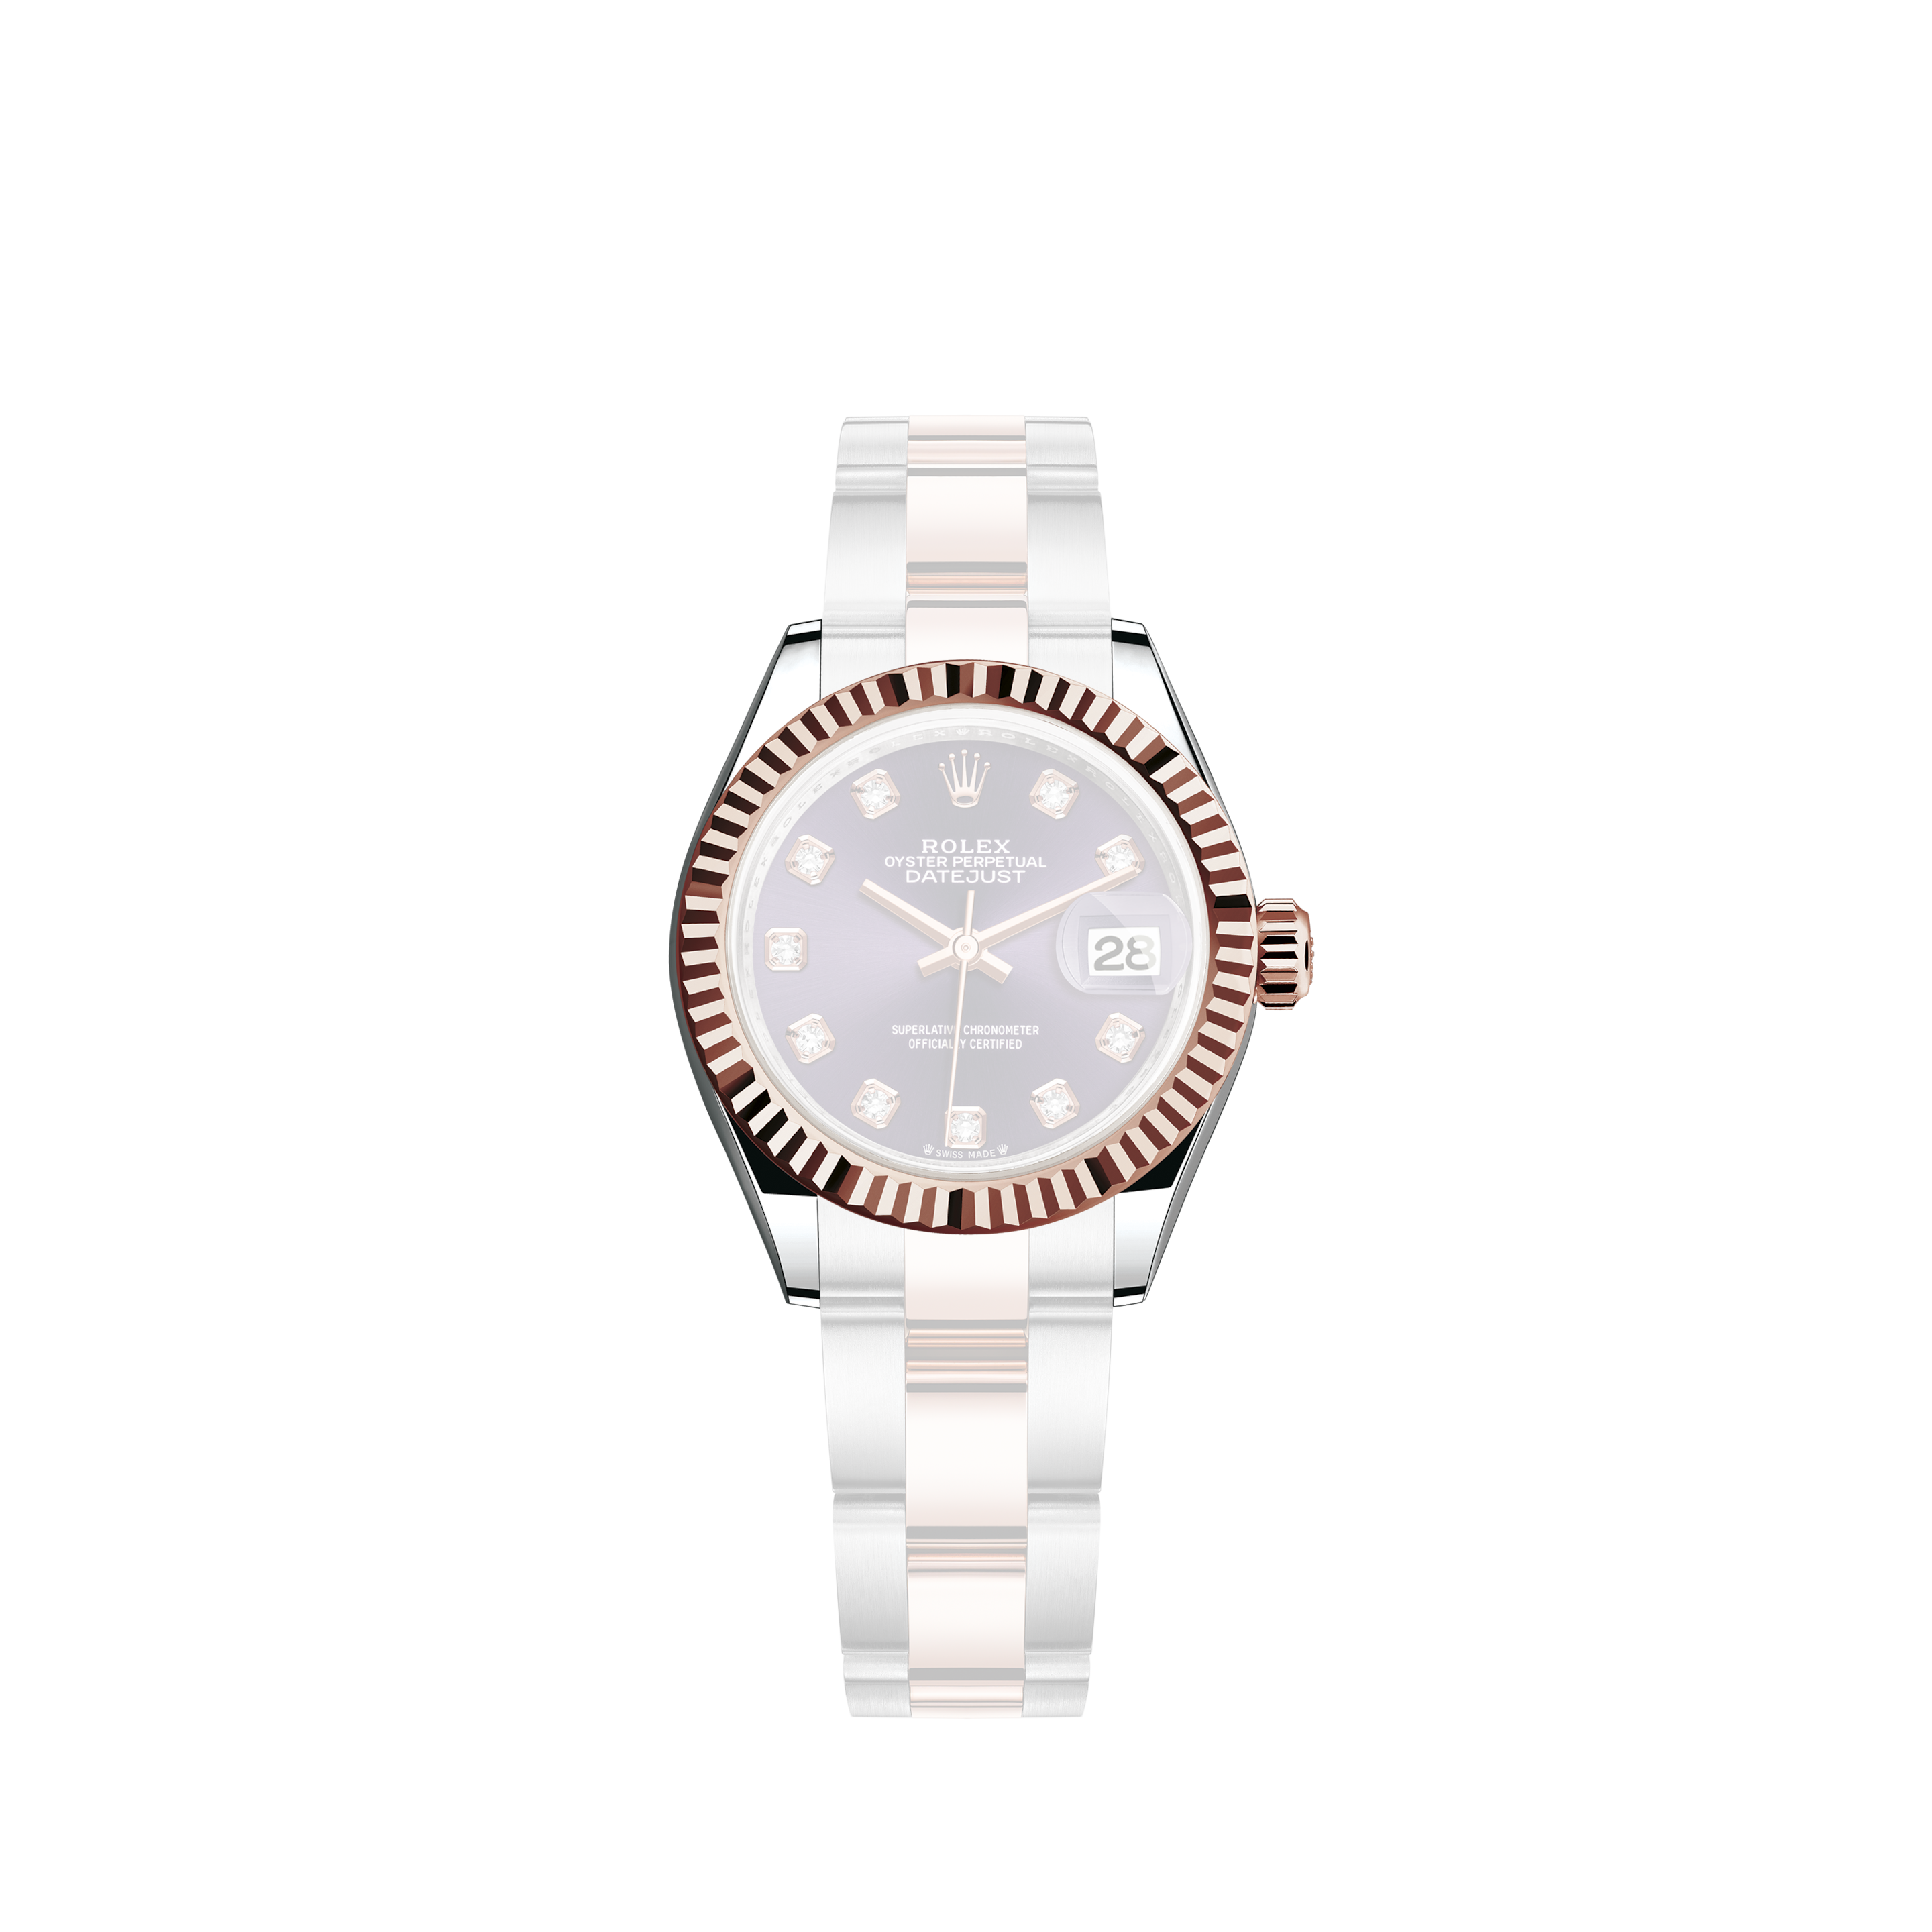 Rolex Oysterdate Precision Vintage Ref. 6694Rolex Oyster Perpetual Datejust Black Mother of Pearl Diamond Dial 36mm Jubilee Watch